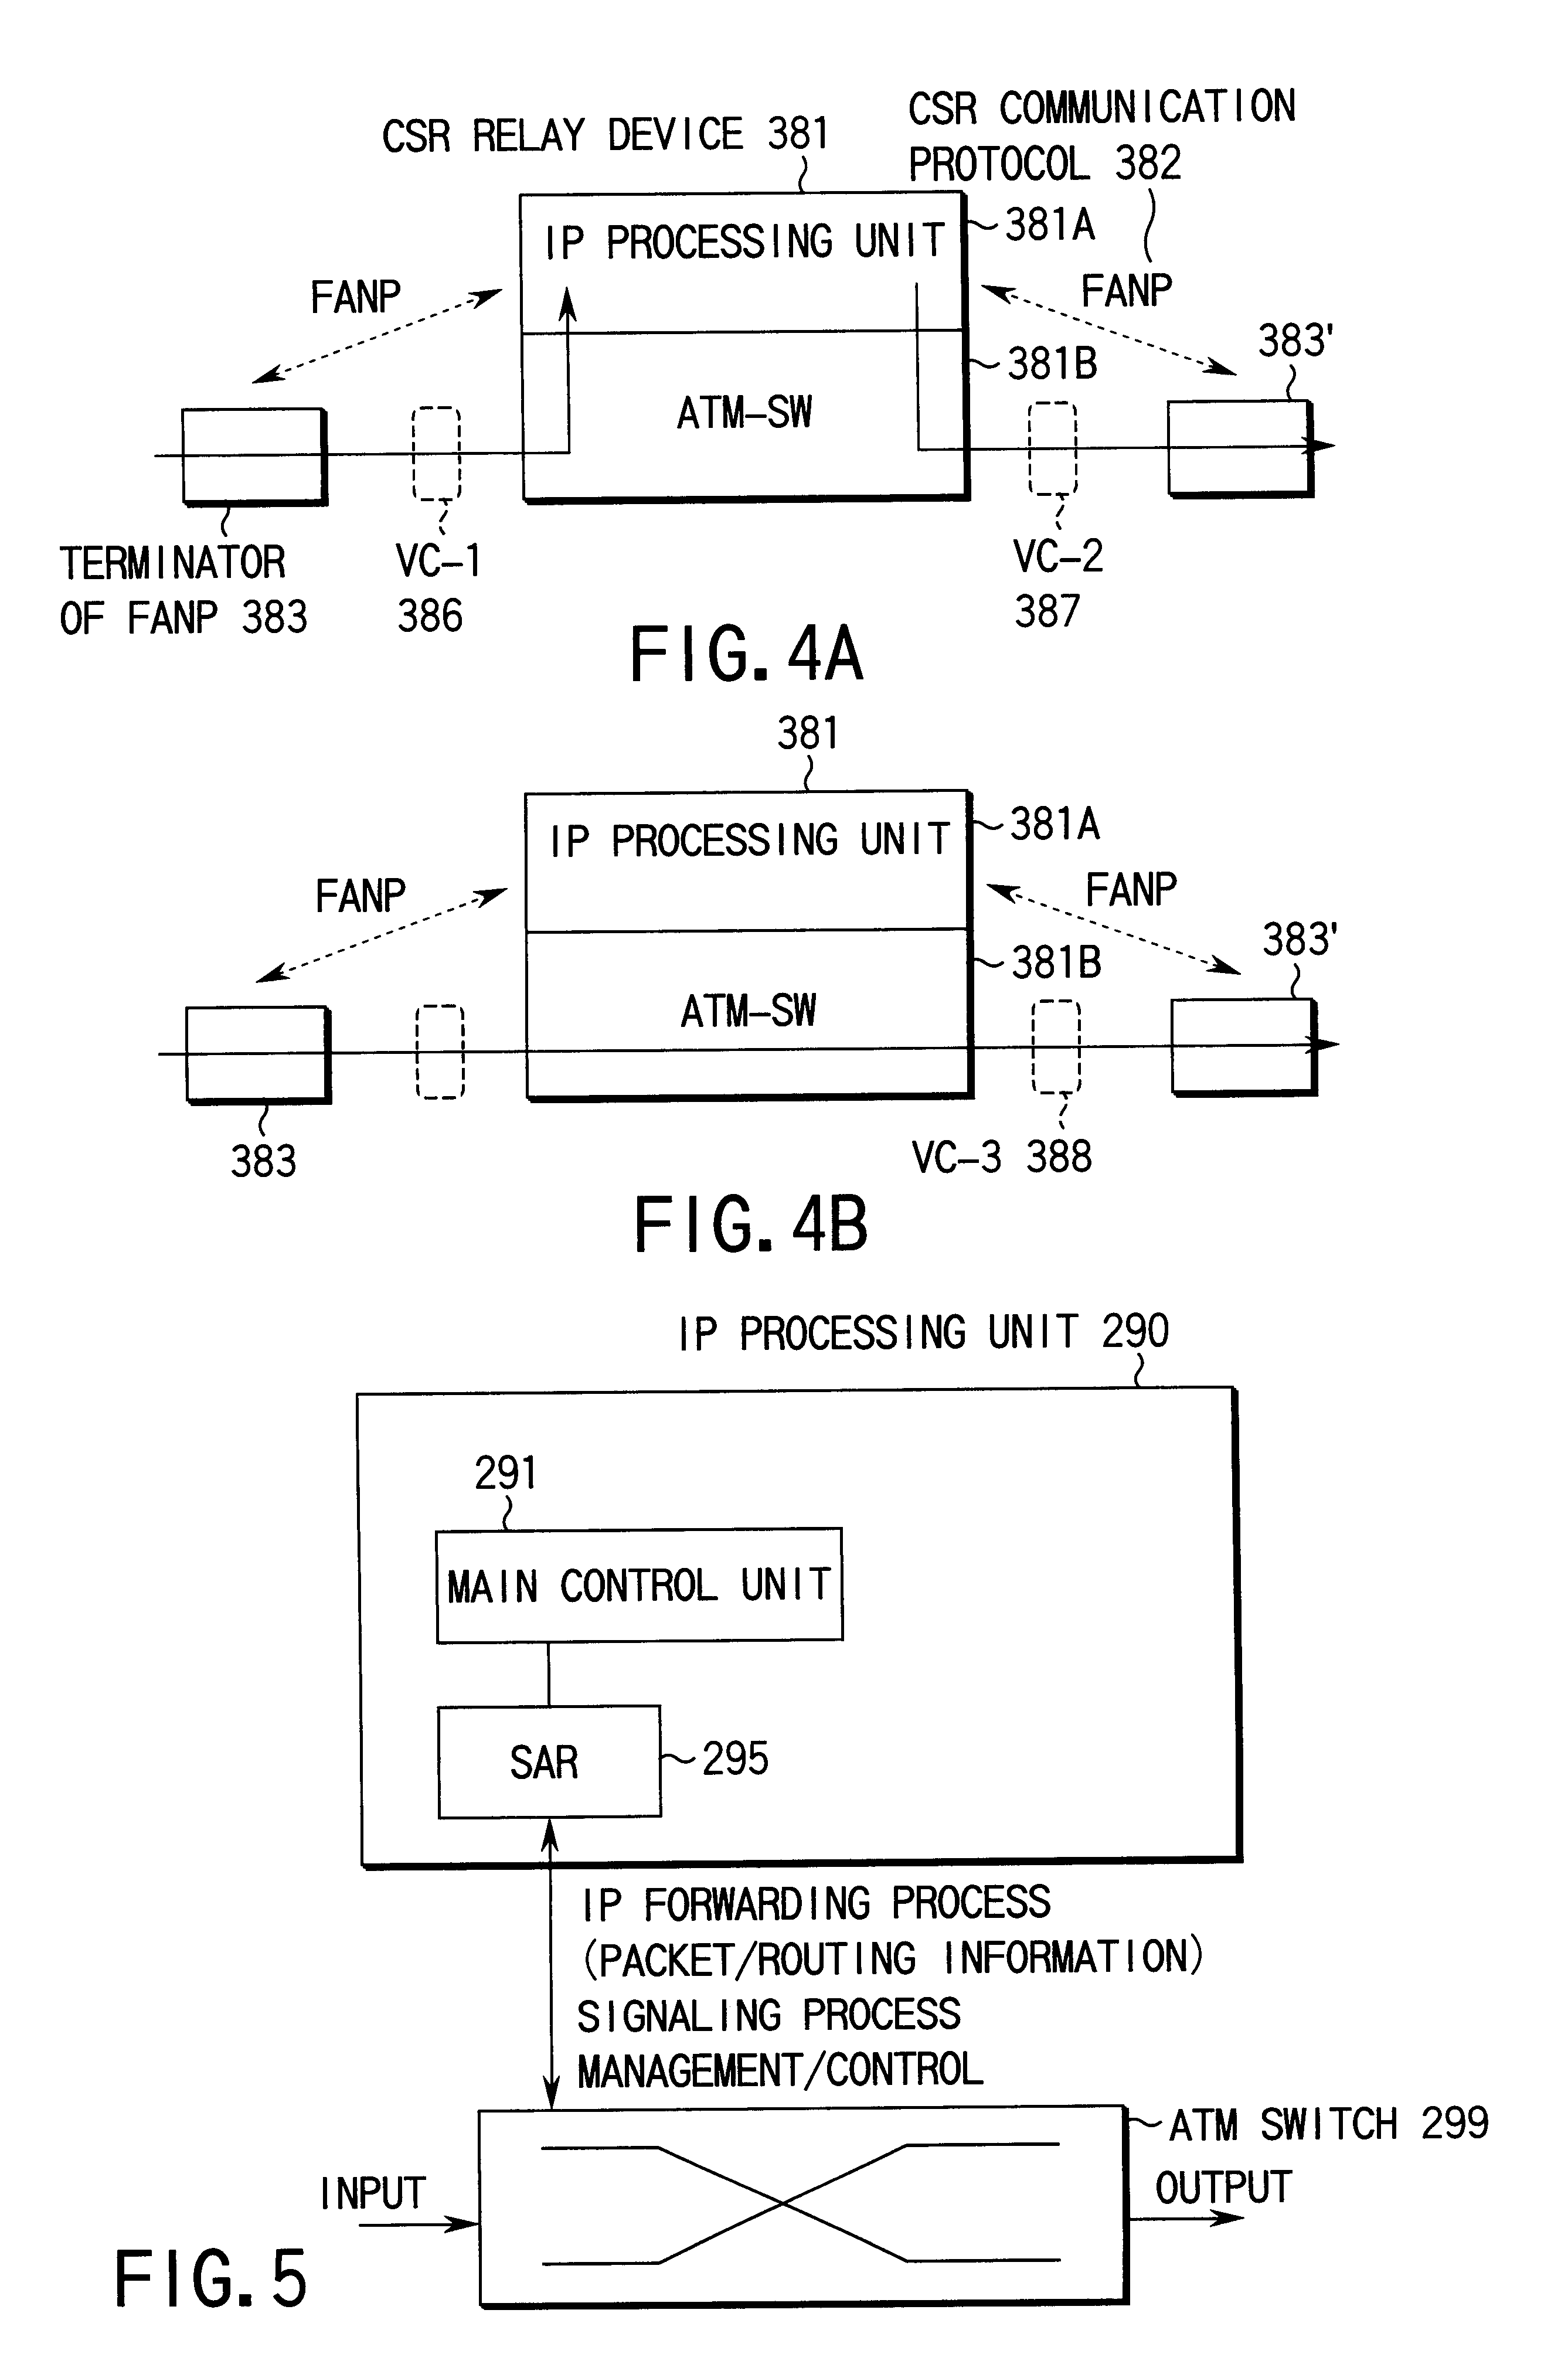 Distributing ATM cells to output ports based upon destination information using ATM switch core and IP forwarding